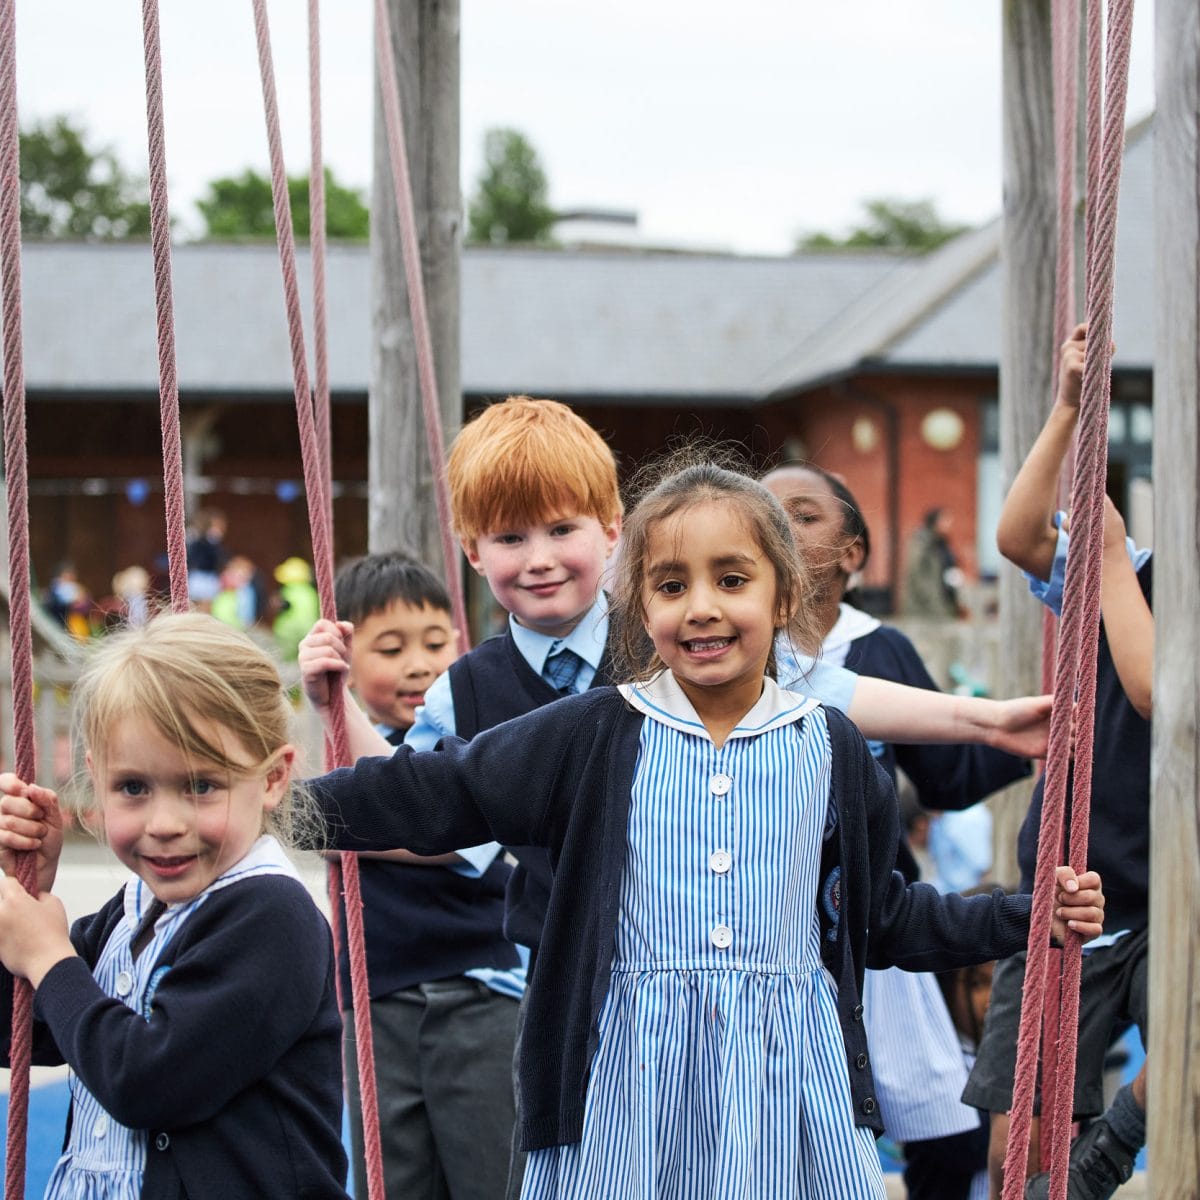 Five Pre-Prep children playing on the adventure trail playground at The Blue Coat School.